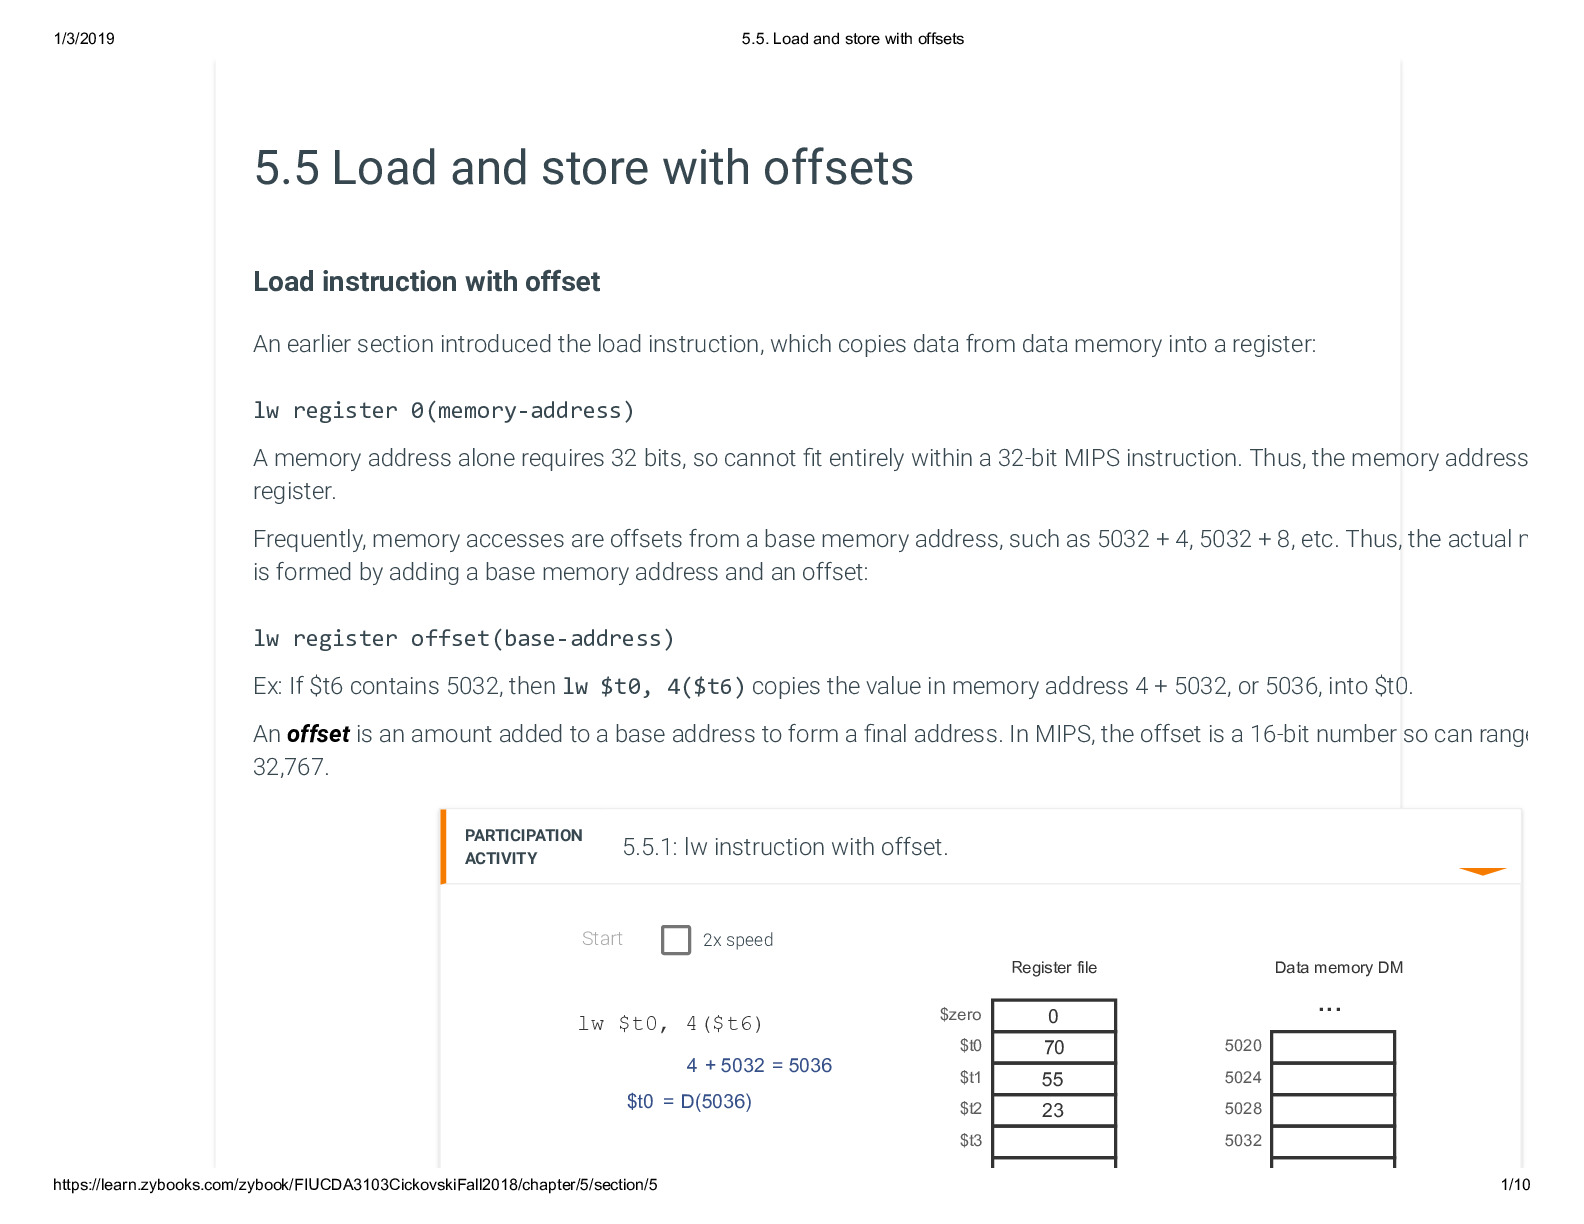 5.5. Load and store with offsets